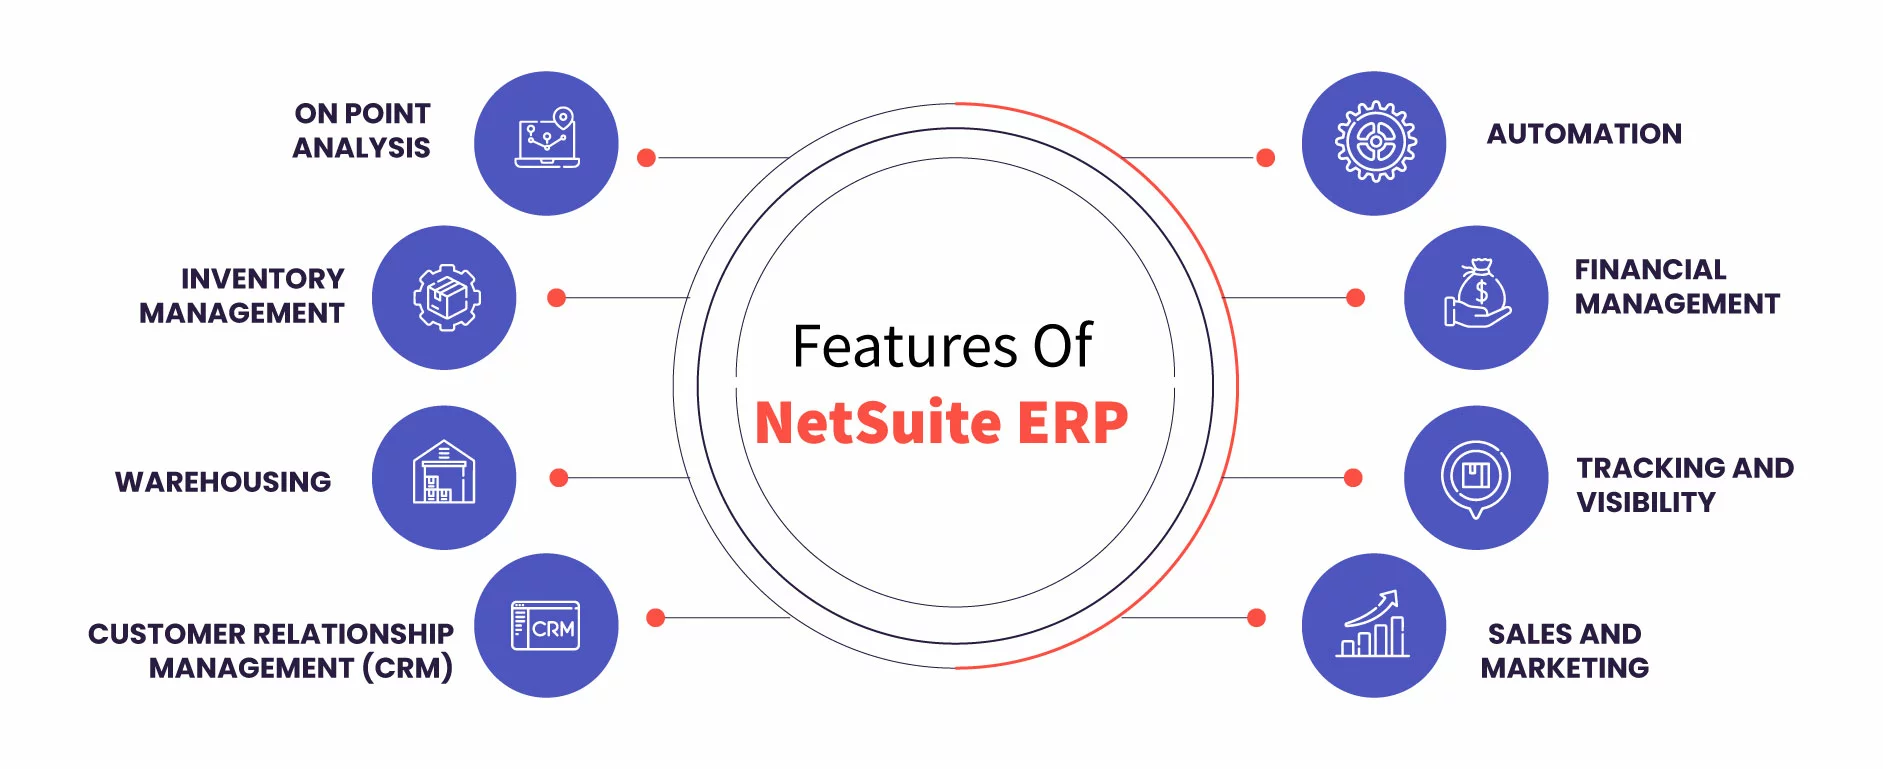 Oracle Netsuite Features